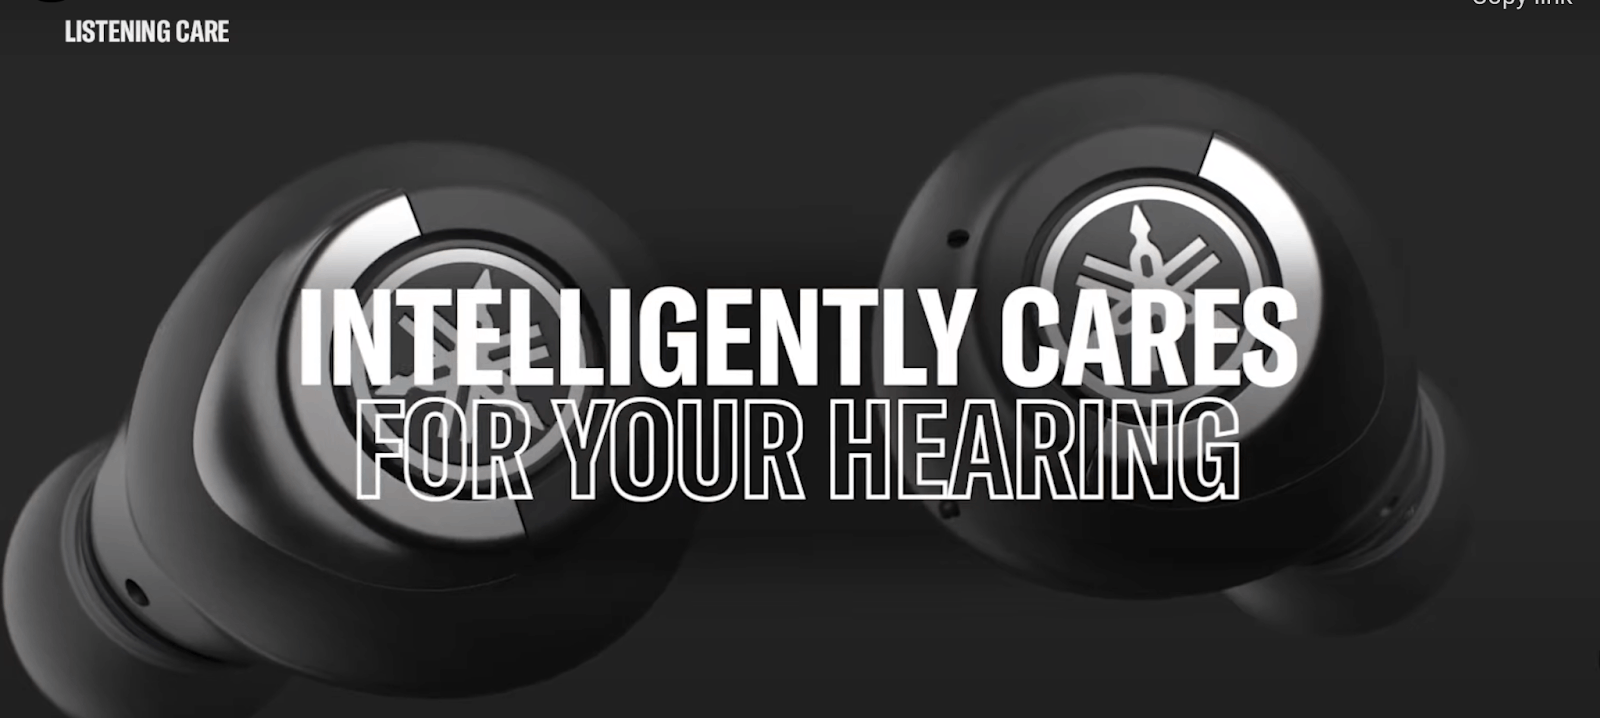 Learn How The TW-E3B True Wireless Protects Hearing